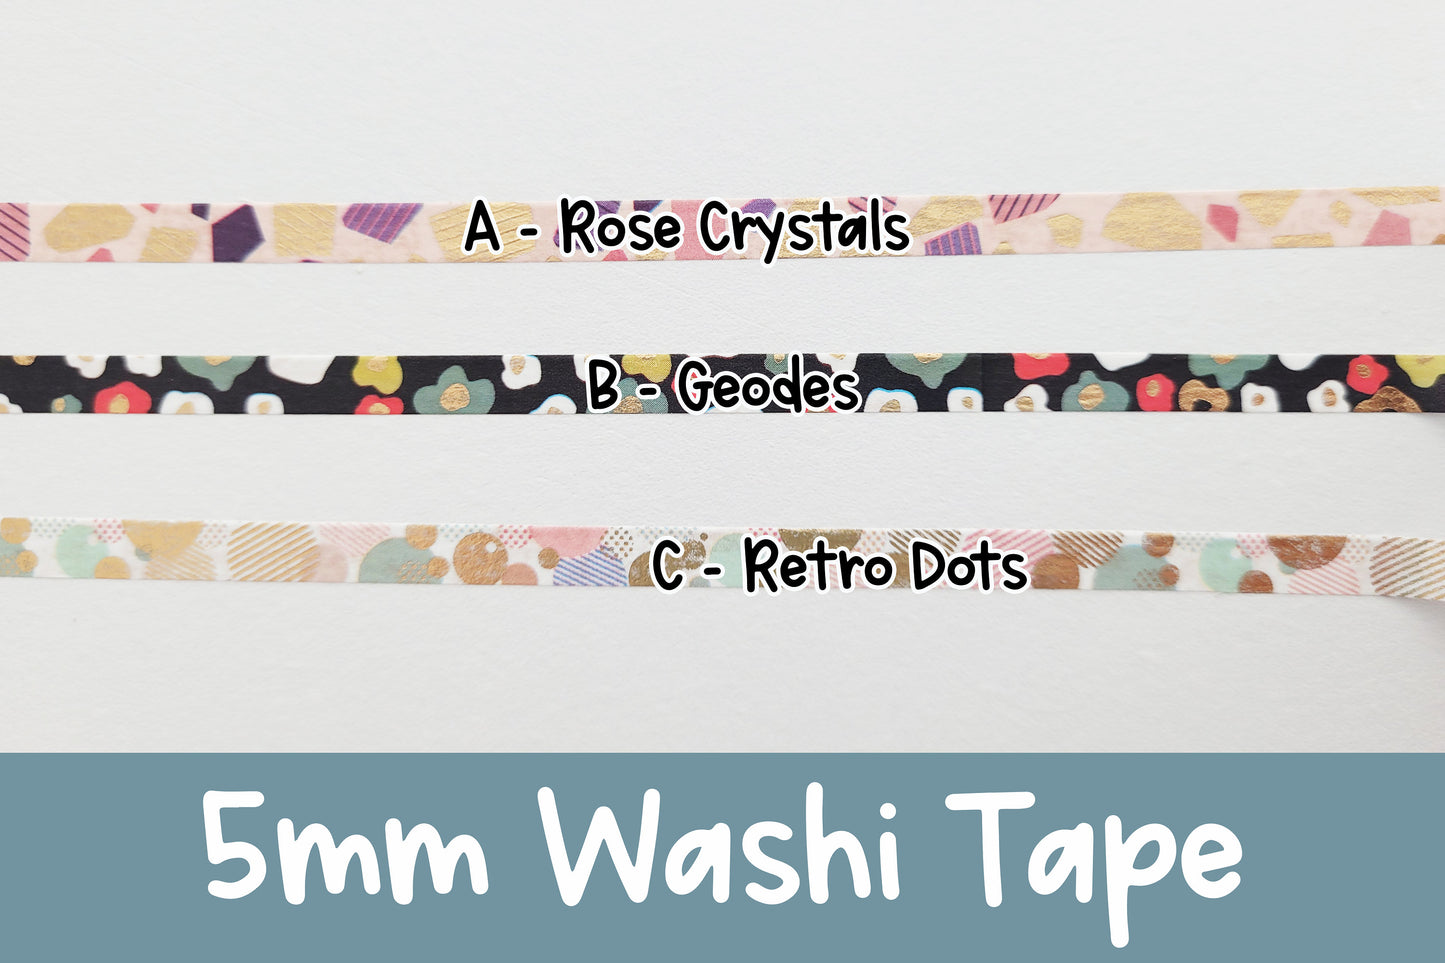 Abstract Designs | 5mm Washi Tape | Gold Foil Decorative Tape